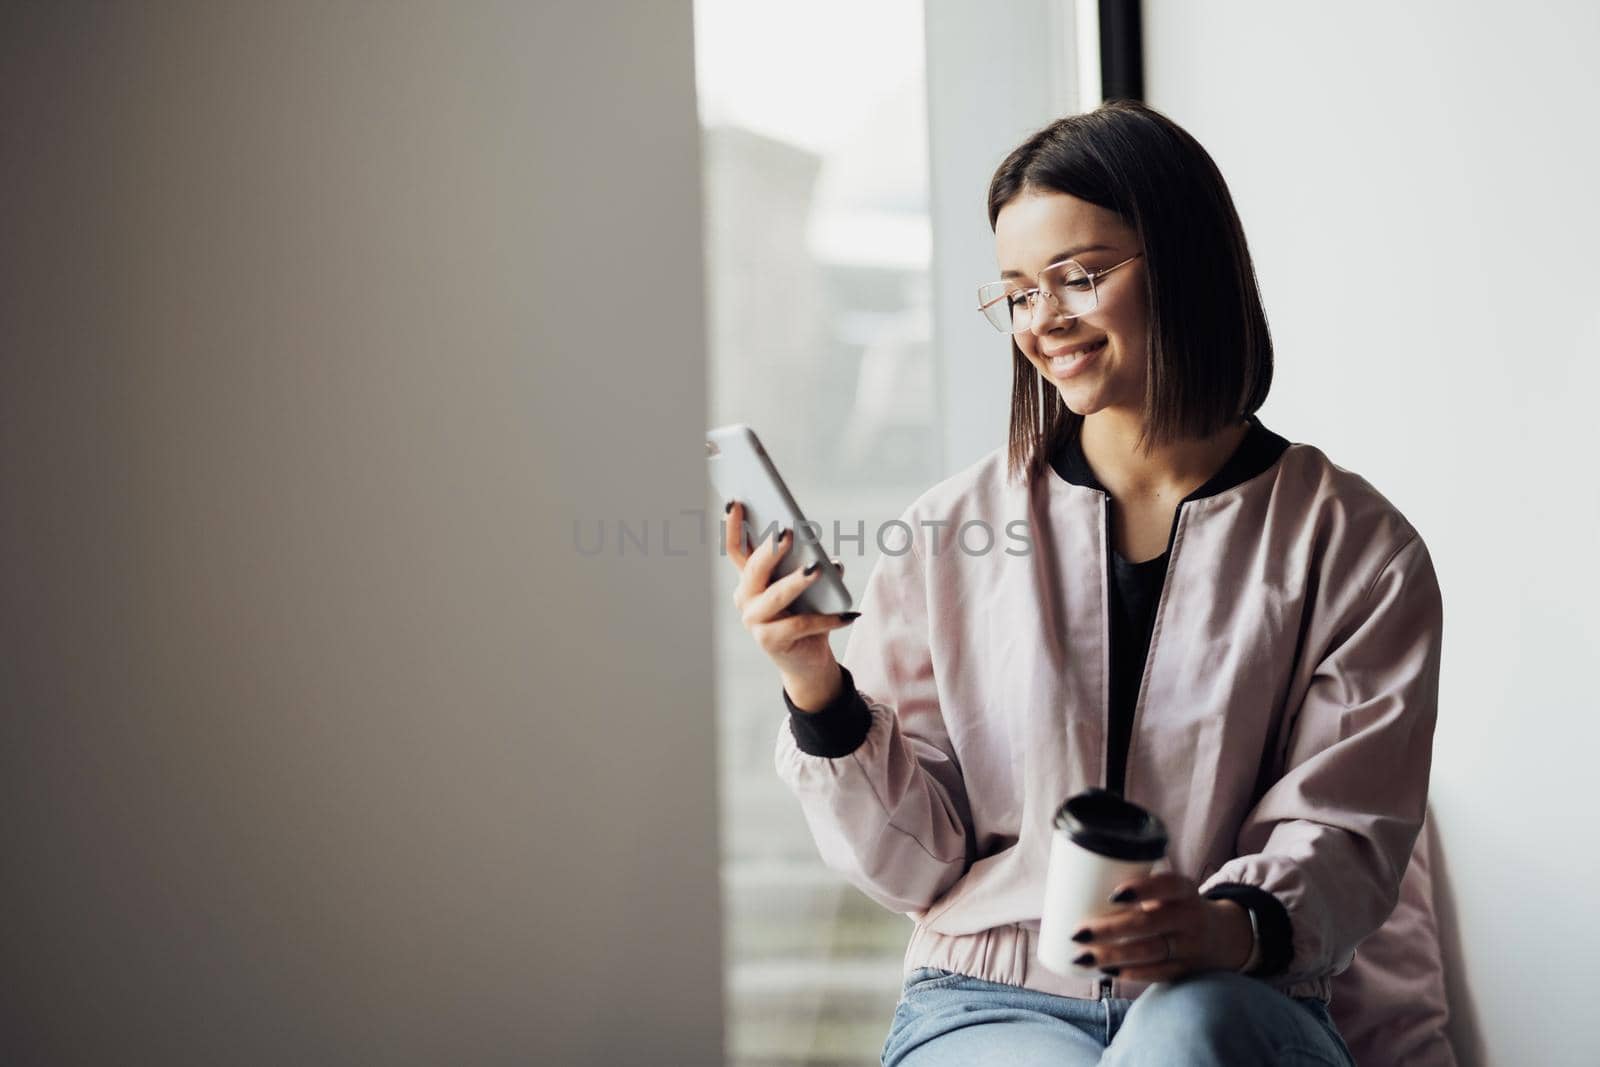 Young Woman in Glasses Drinking Coffee and Using Smartphone While Sitting on Windowsill